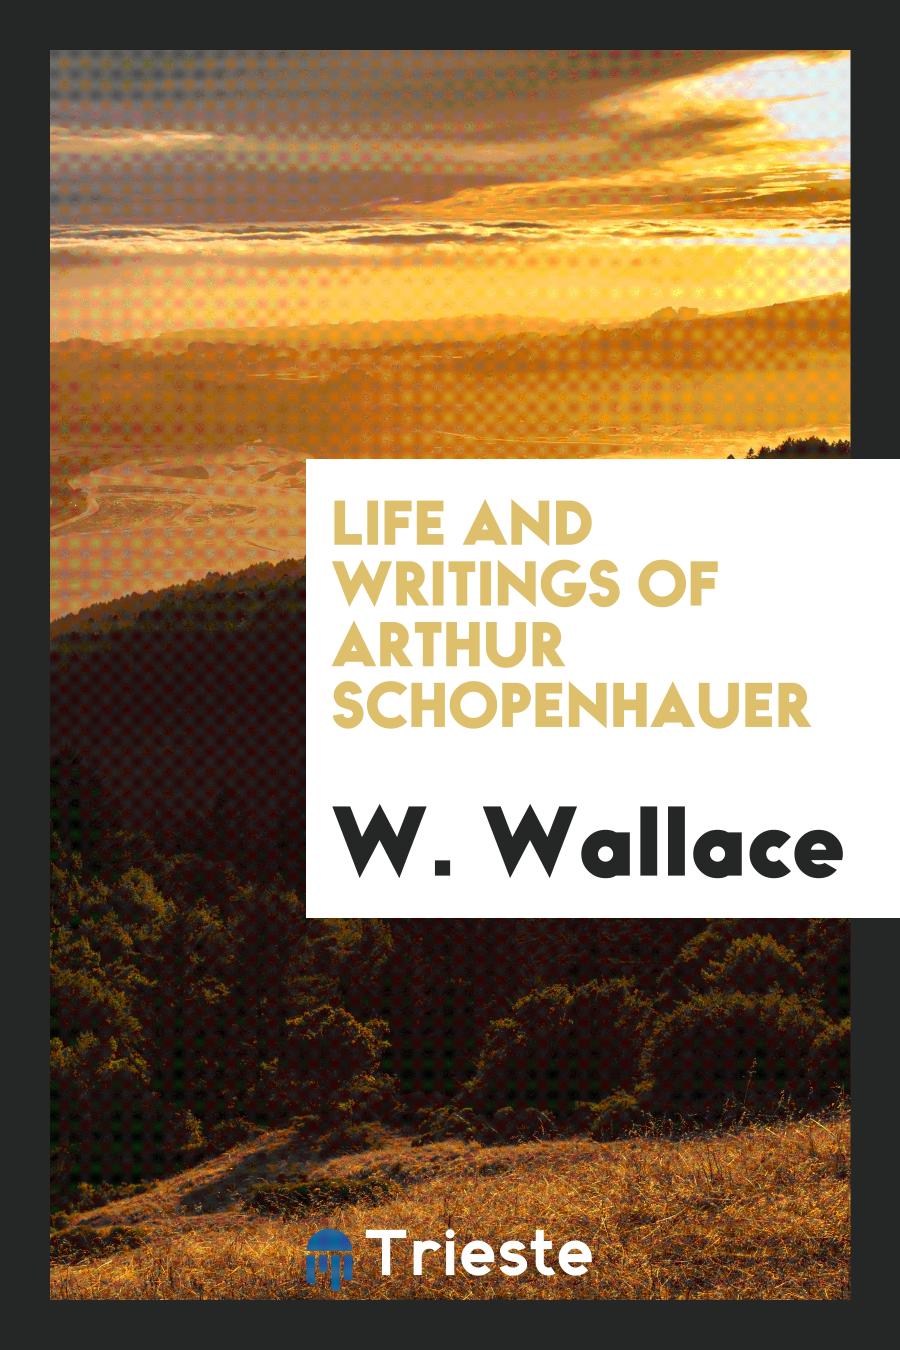 Life and writings of Arthur Schopenhauer